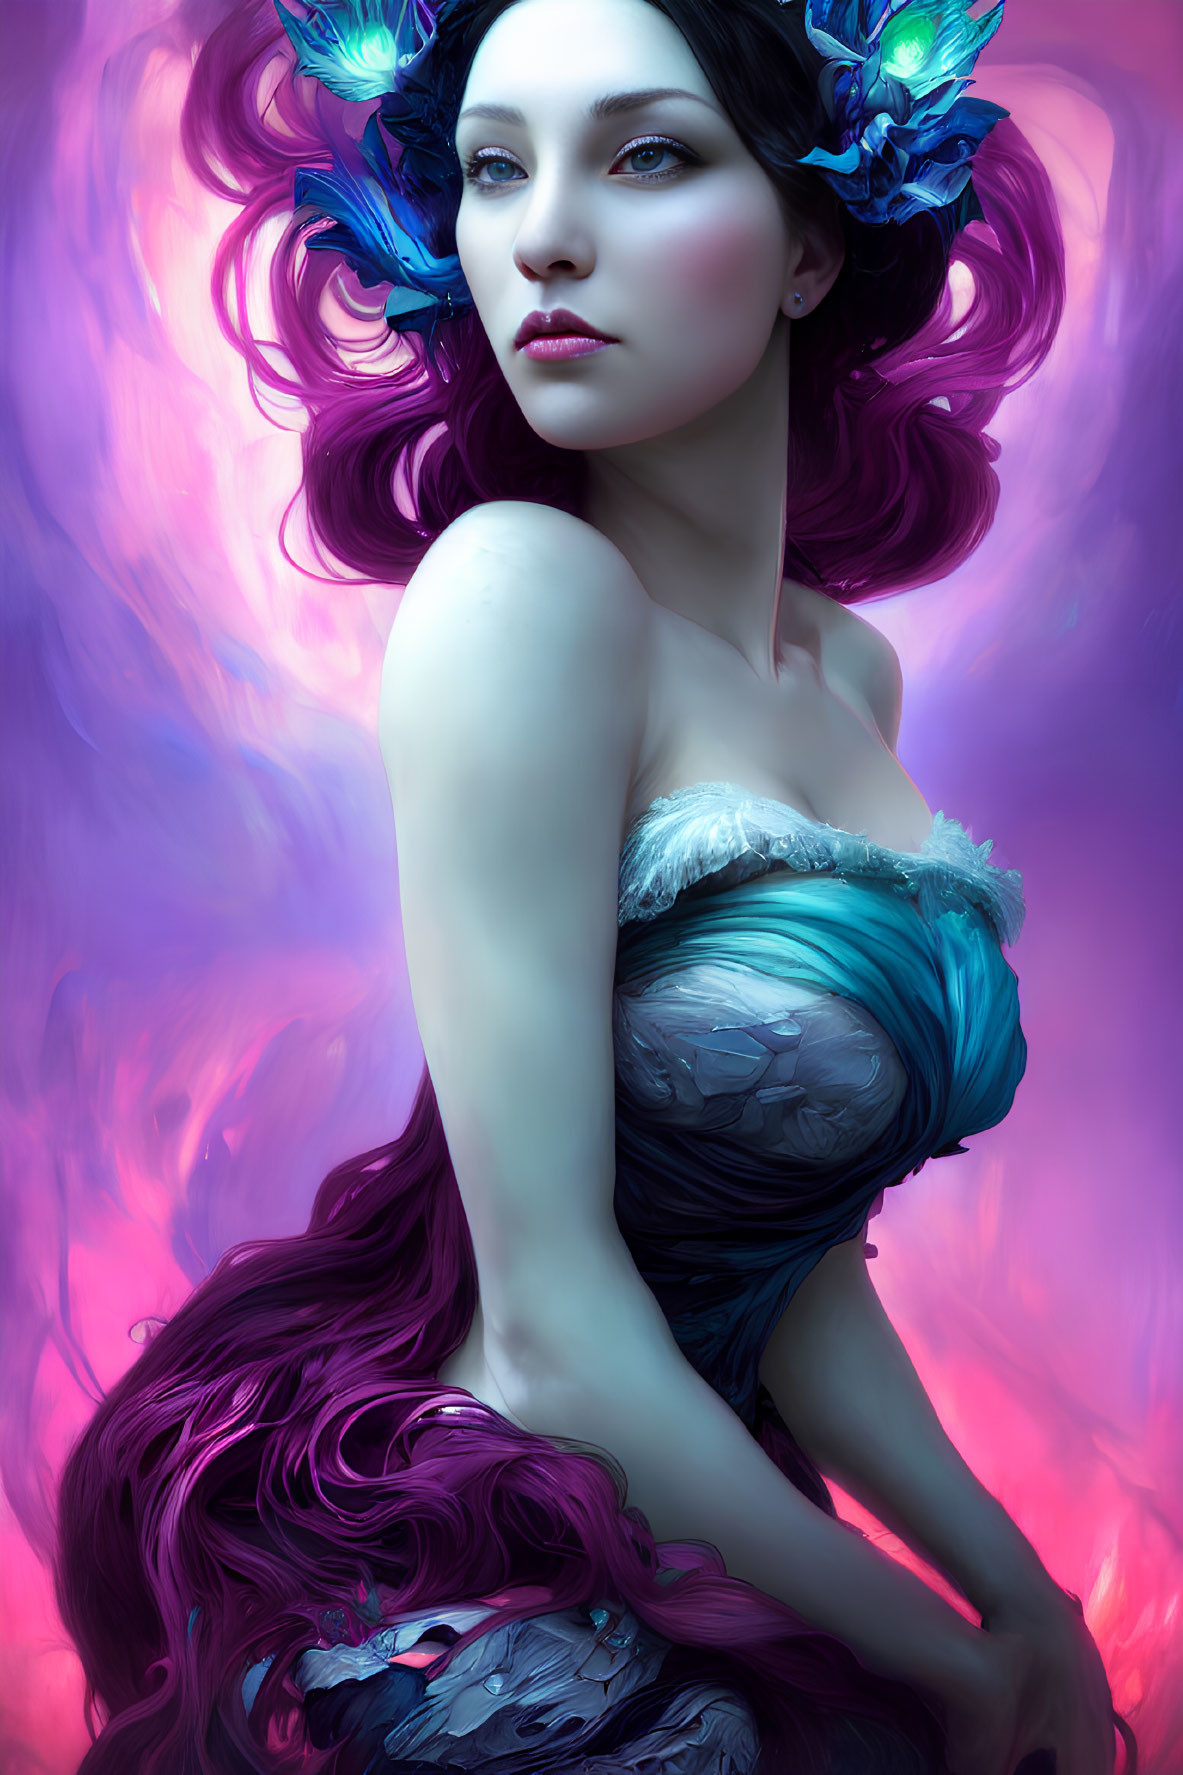 Fantastical Woman in Striking Violet and Blue Tones with Flowing Hair and Feathers